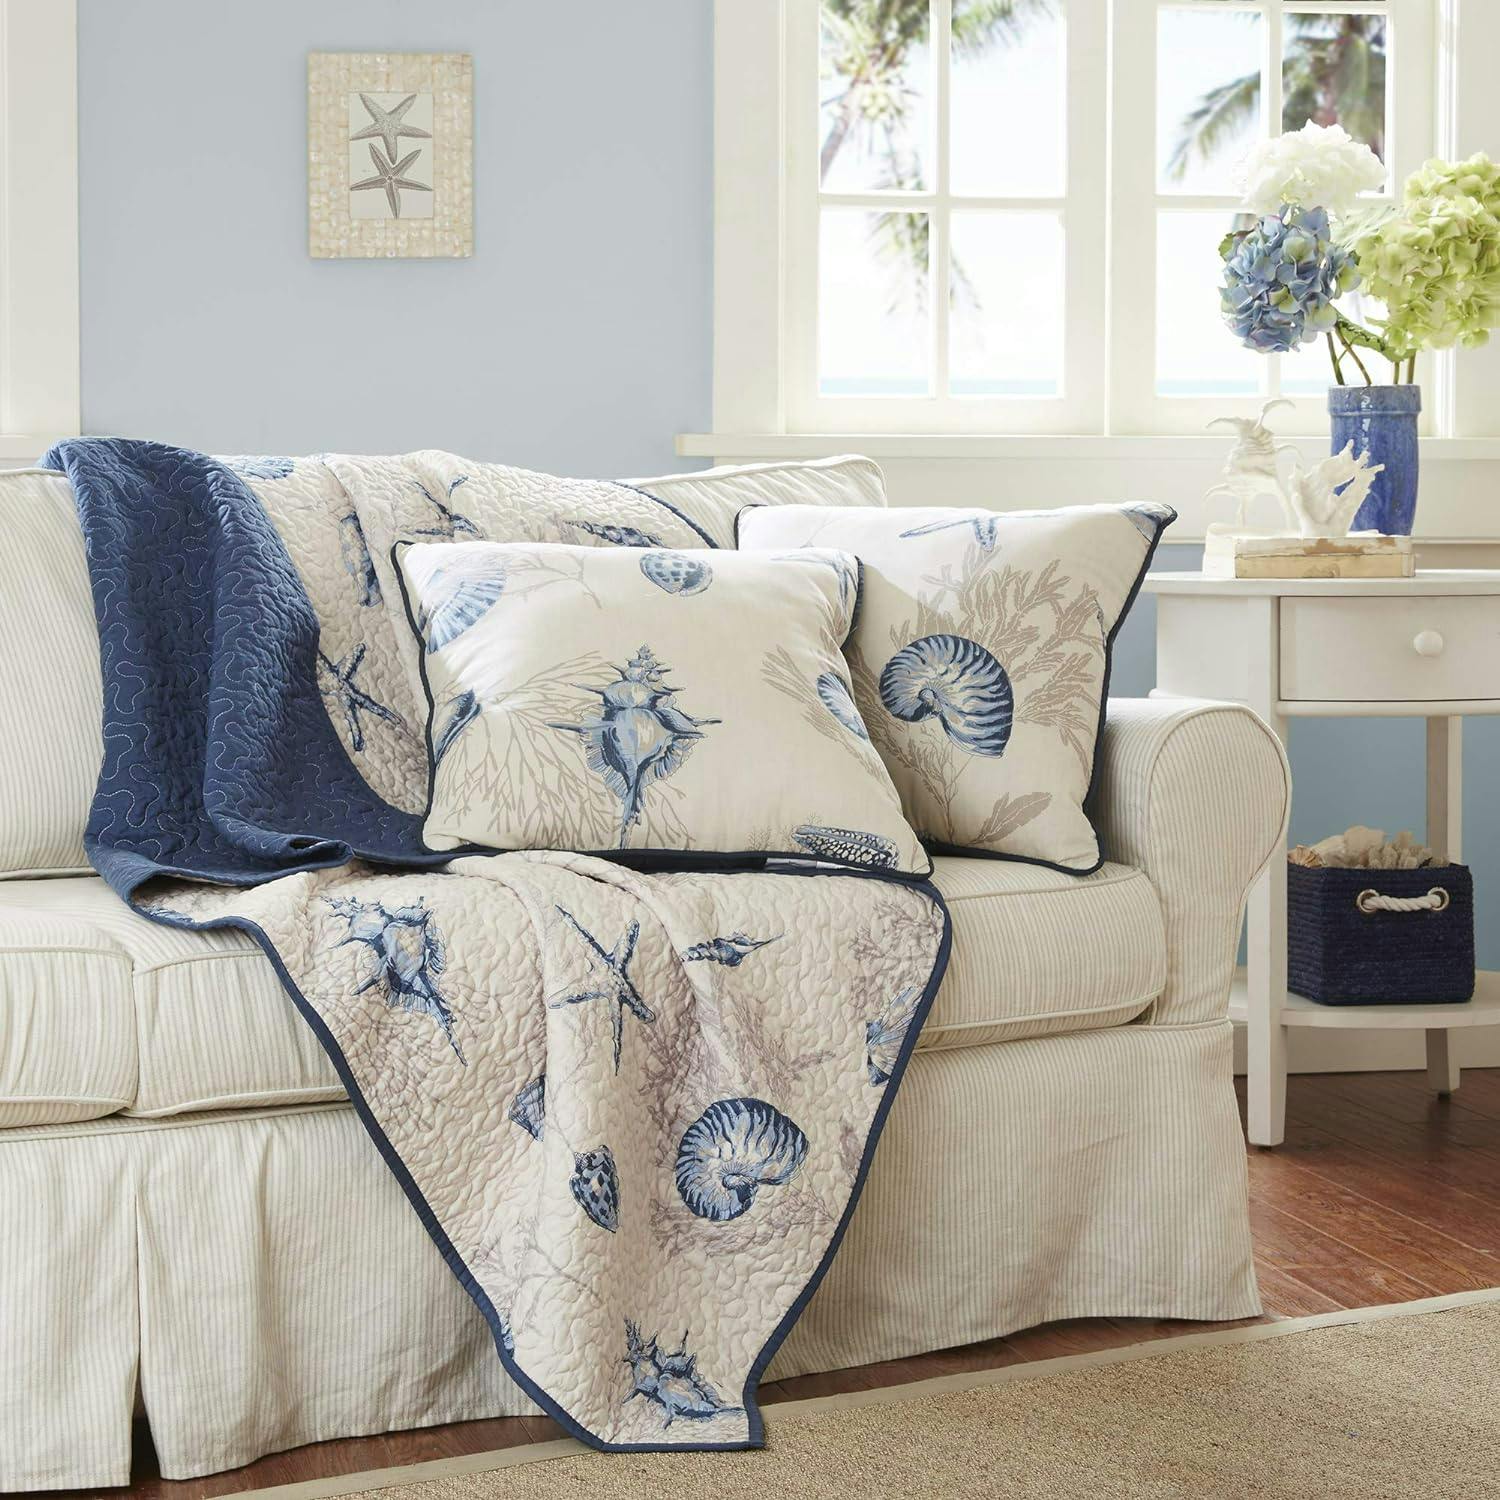 Bayside Oversized Quilted Throw in Ivory and Navy Blue 60"x70"